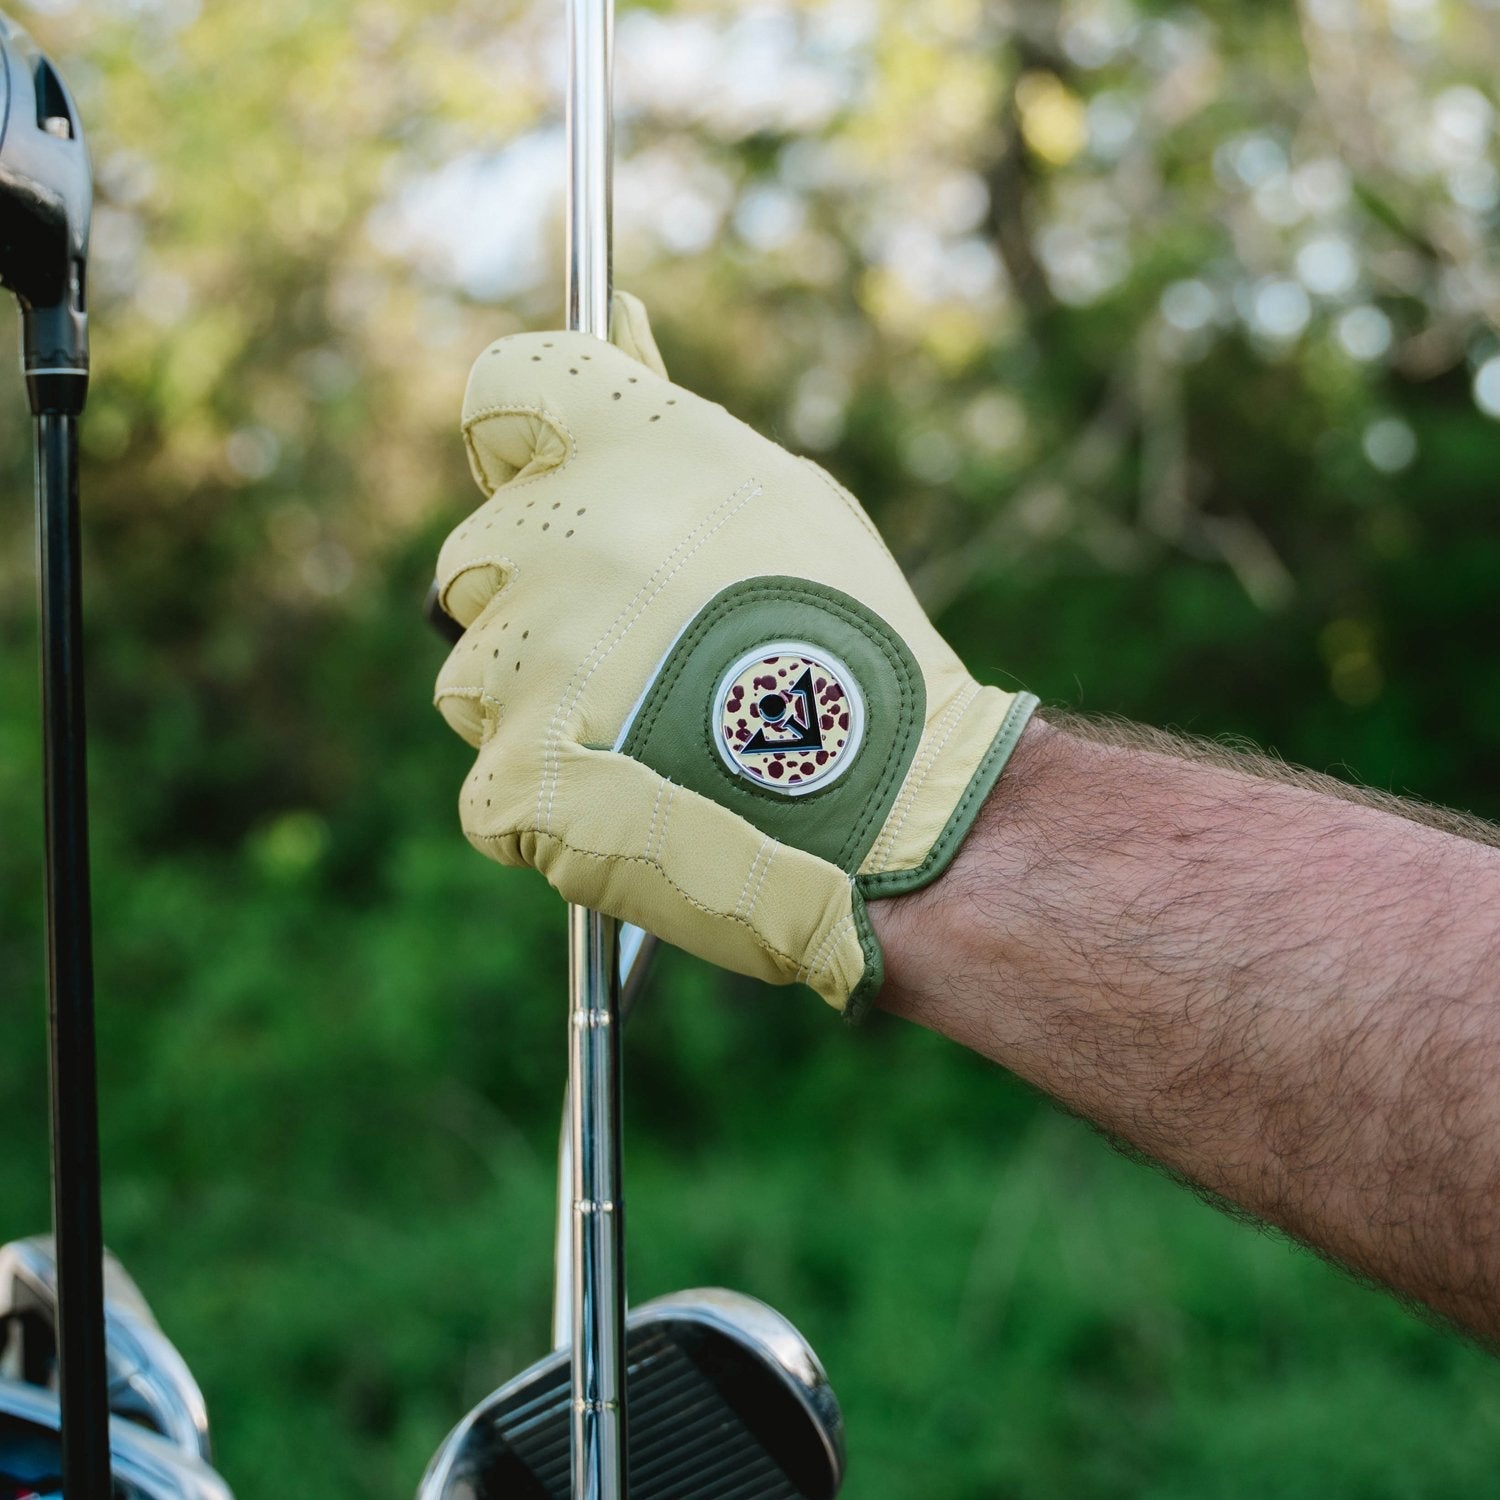 Men's yellow and green golf glove with a cheetah print magnetic ball marker putting away a golf club in their bag.